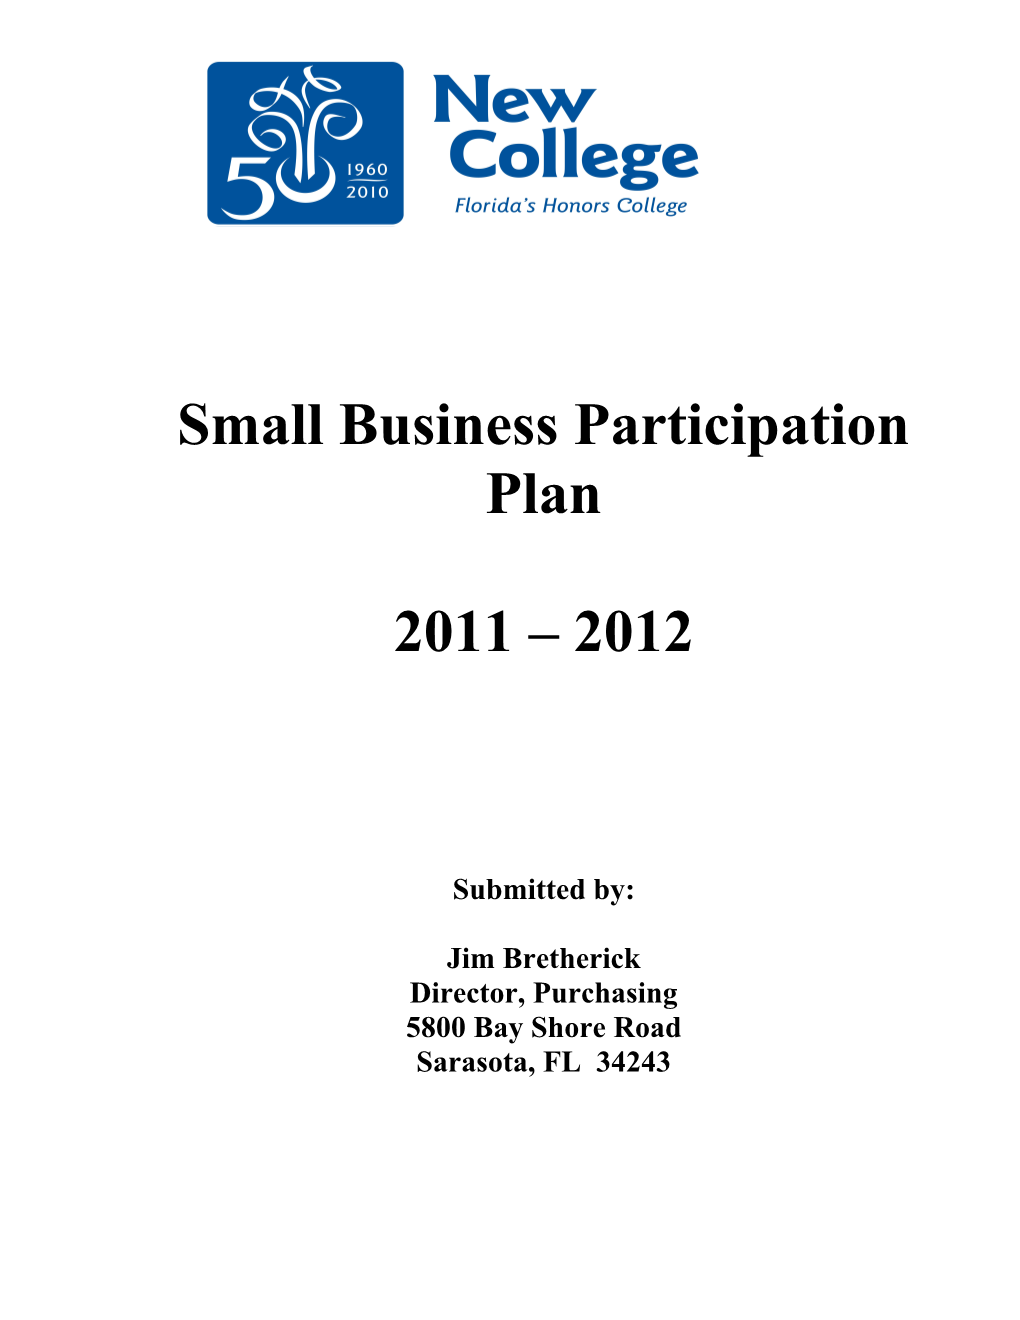 Small Business Participation Plan